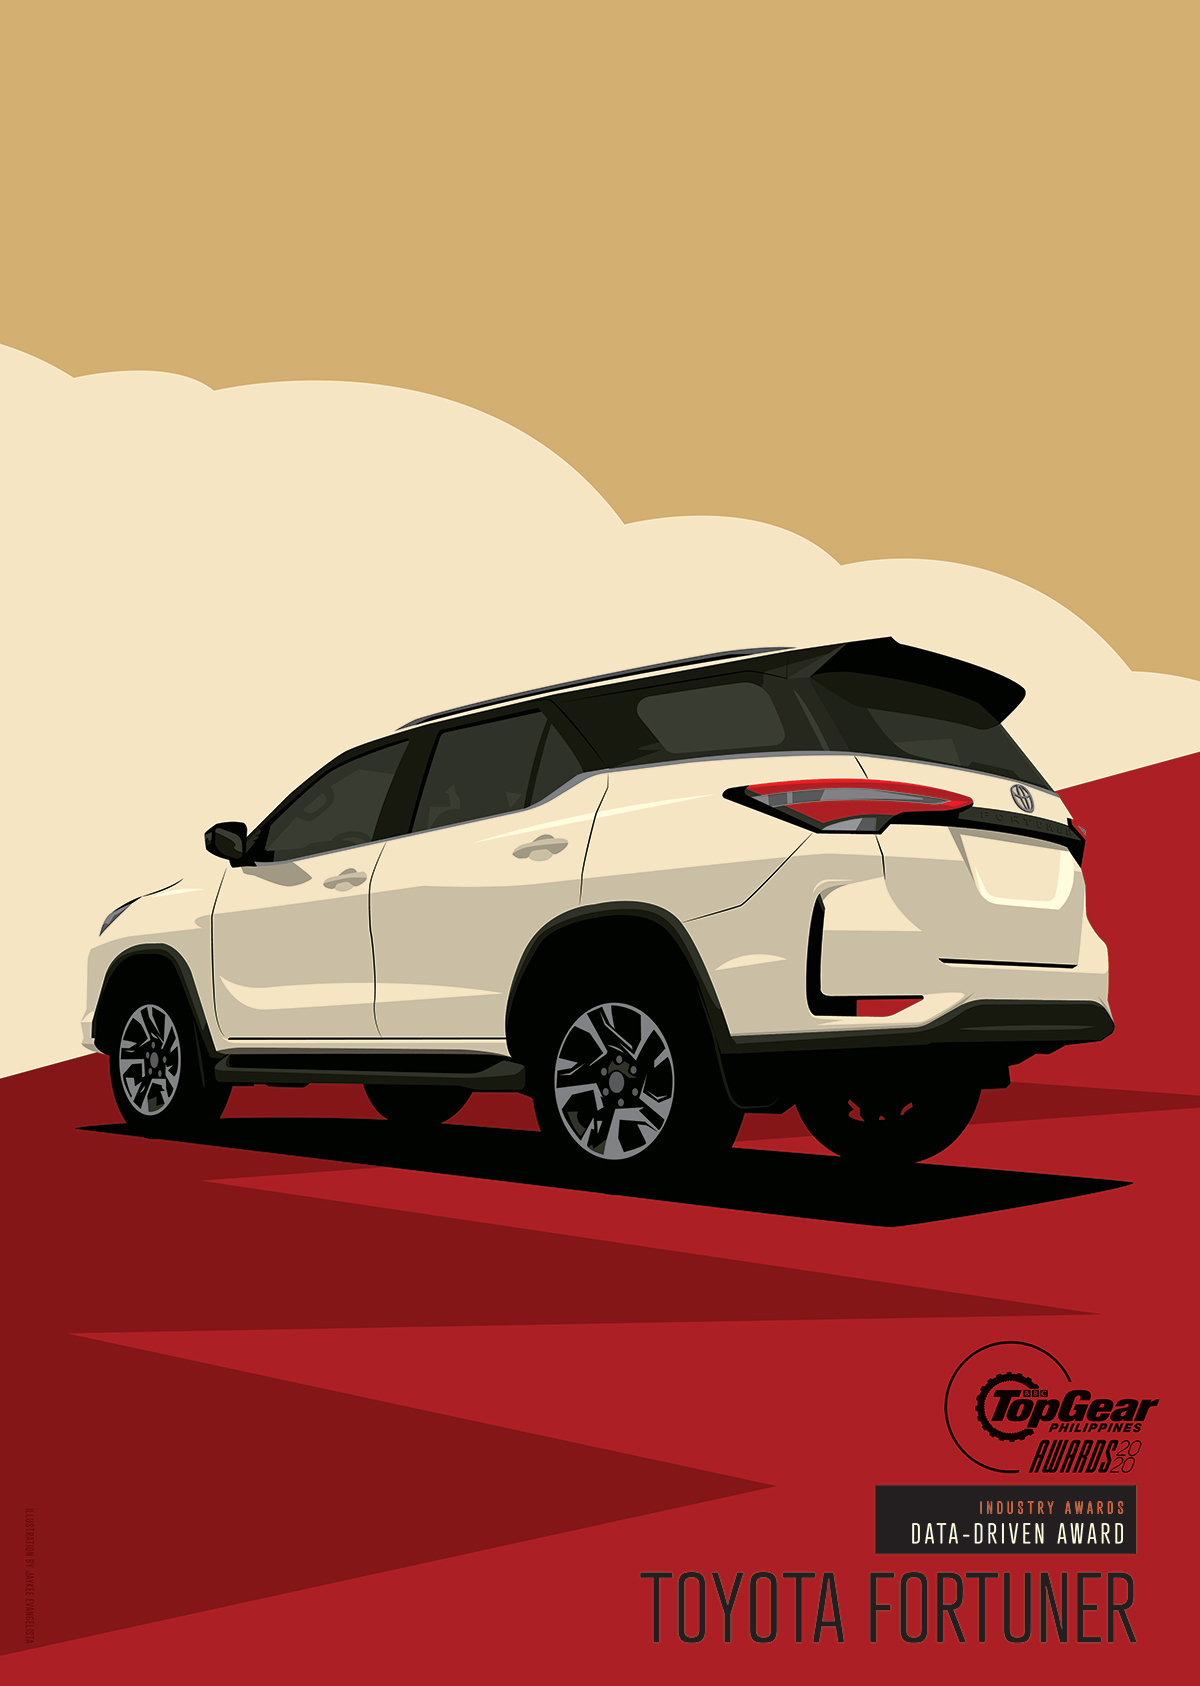 Top Gear Philippines' Data-Driven Award – Toyota Fortuner